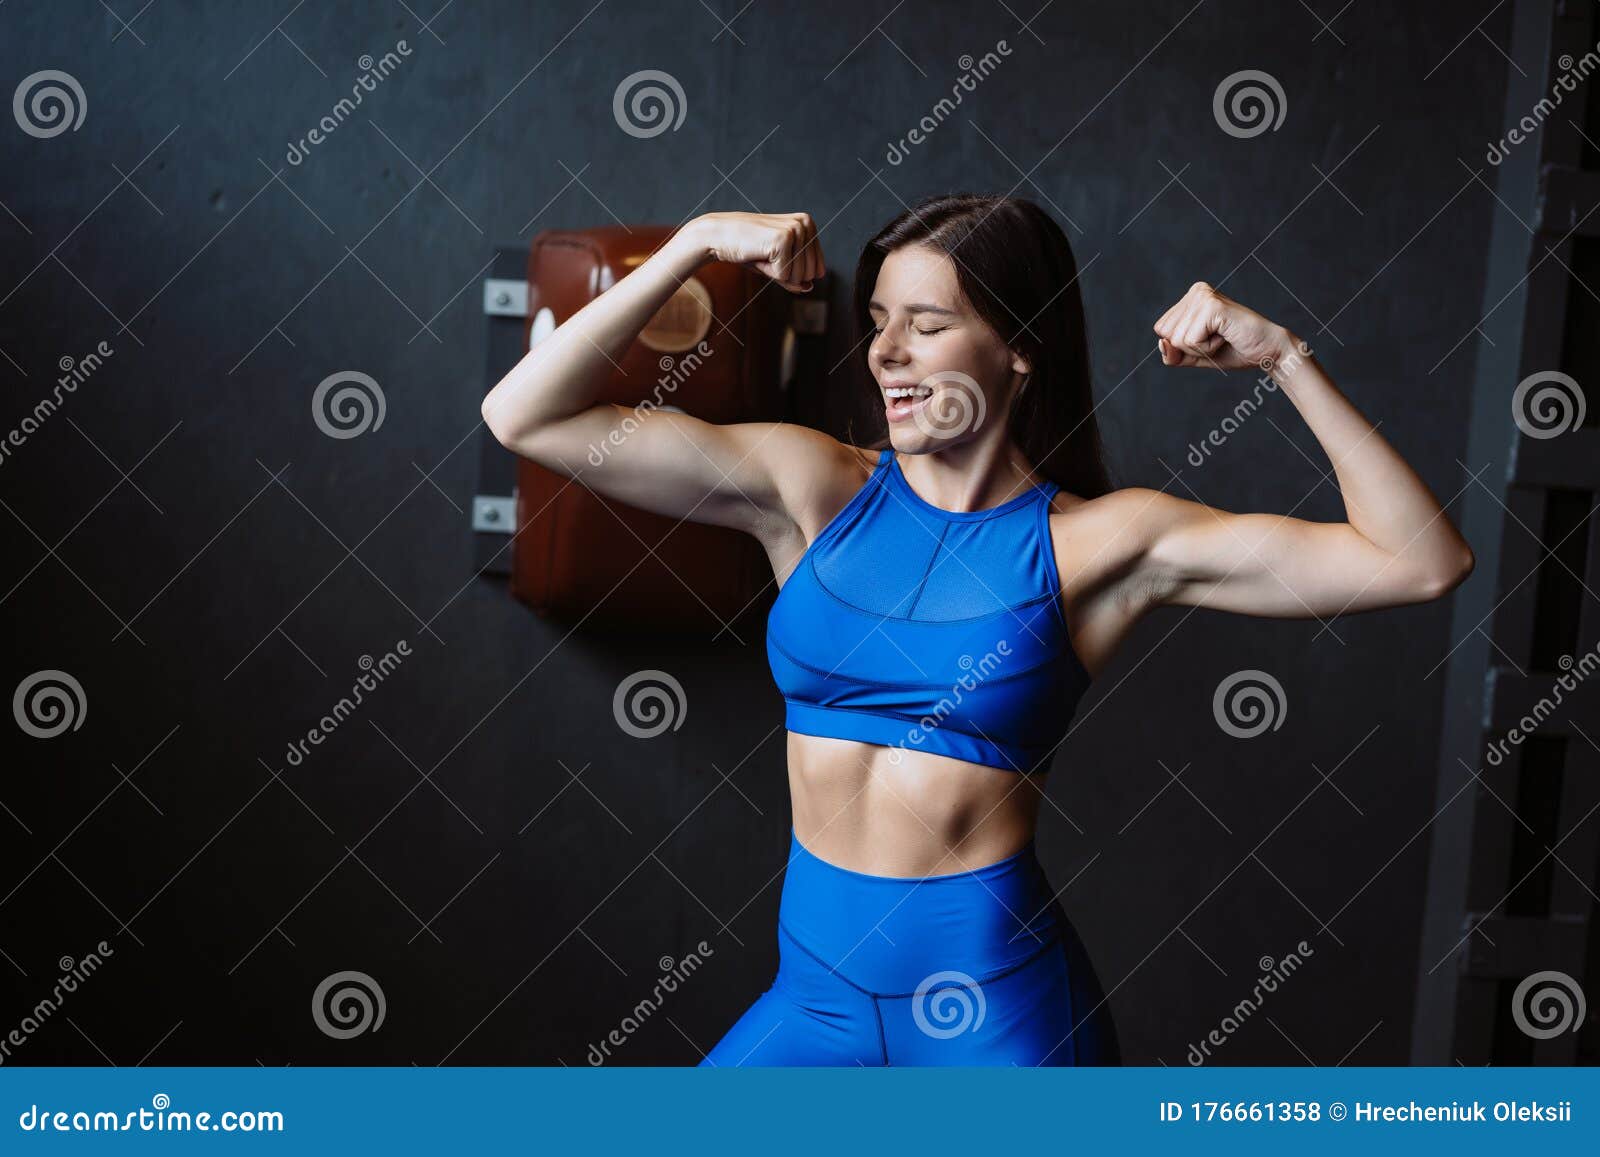 Fit Female Athlete Poses In Gym After Intense Workout Photo Background And  Picture For Free Download - Pngtree